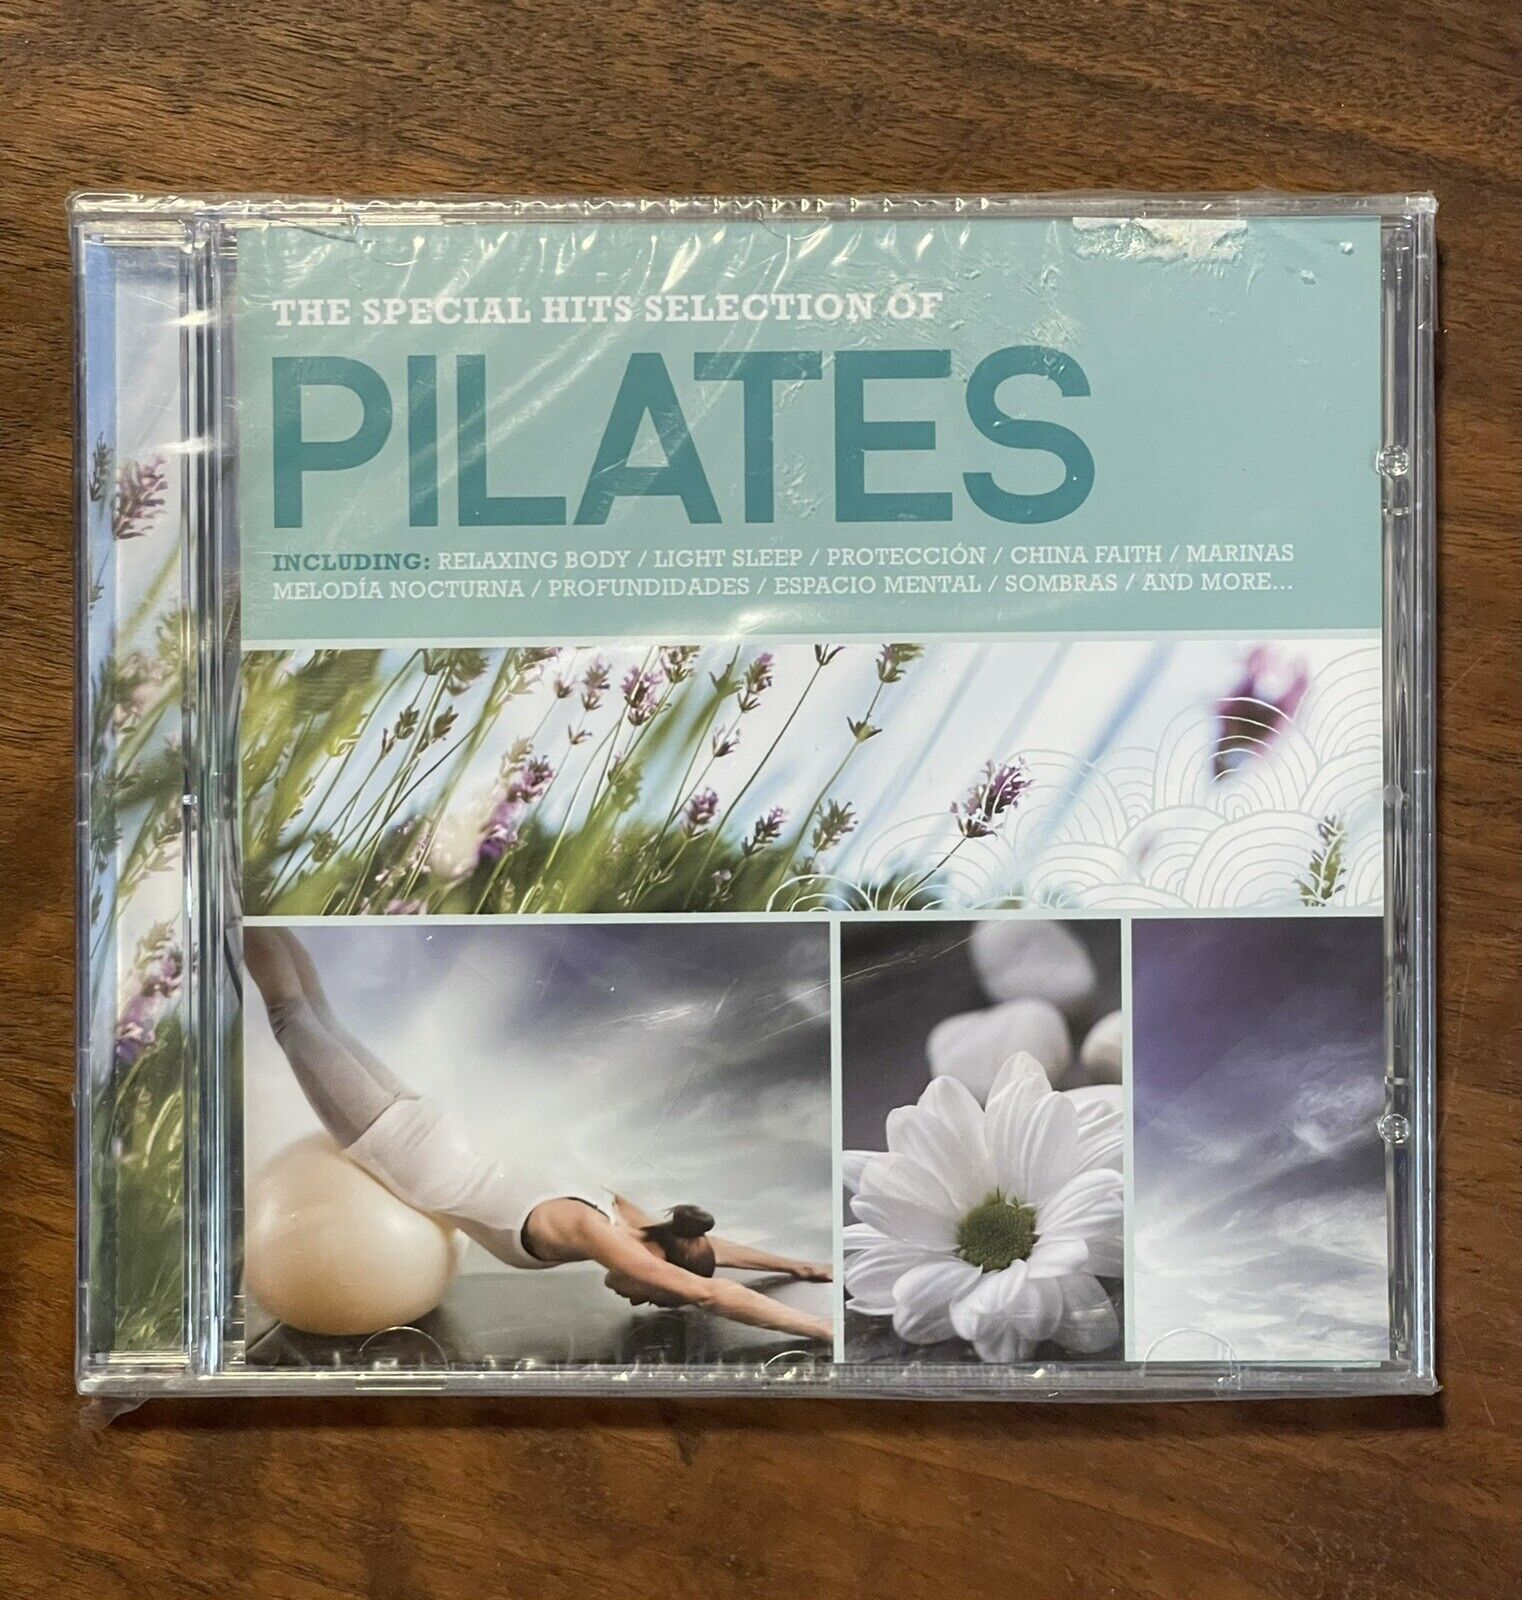 Special Hits Selection of Pilates / Various by Various Artists (CD, 2012)